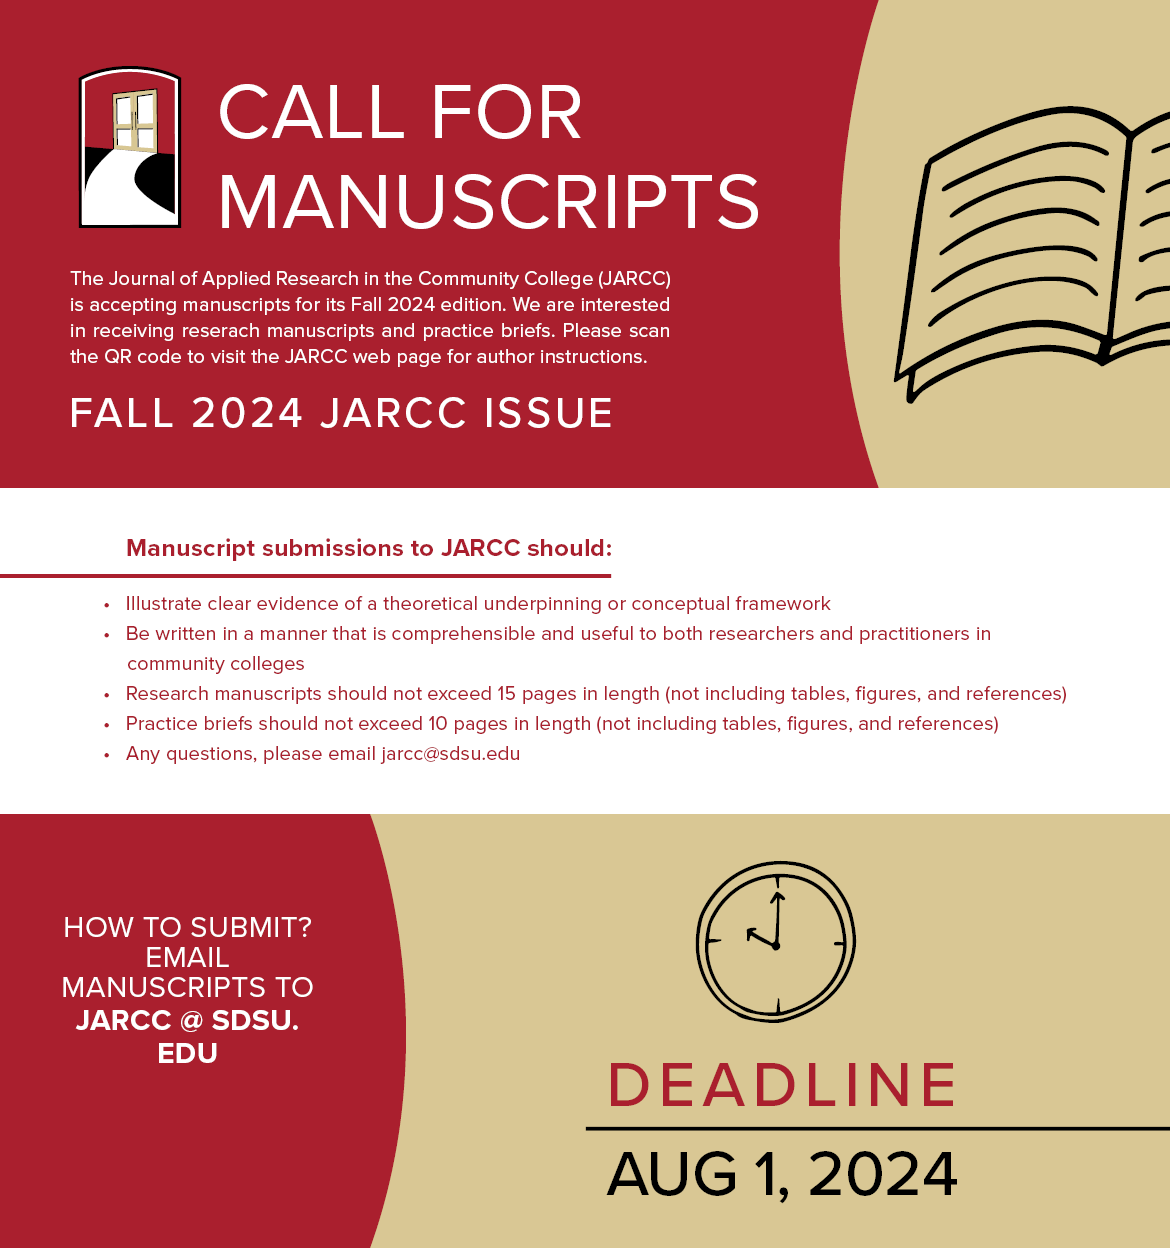 The Journal of applied research in the community college (JARCC) is accepting manuscripts for its Fall 2024 edition.